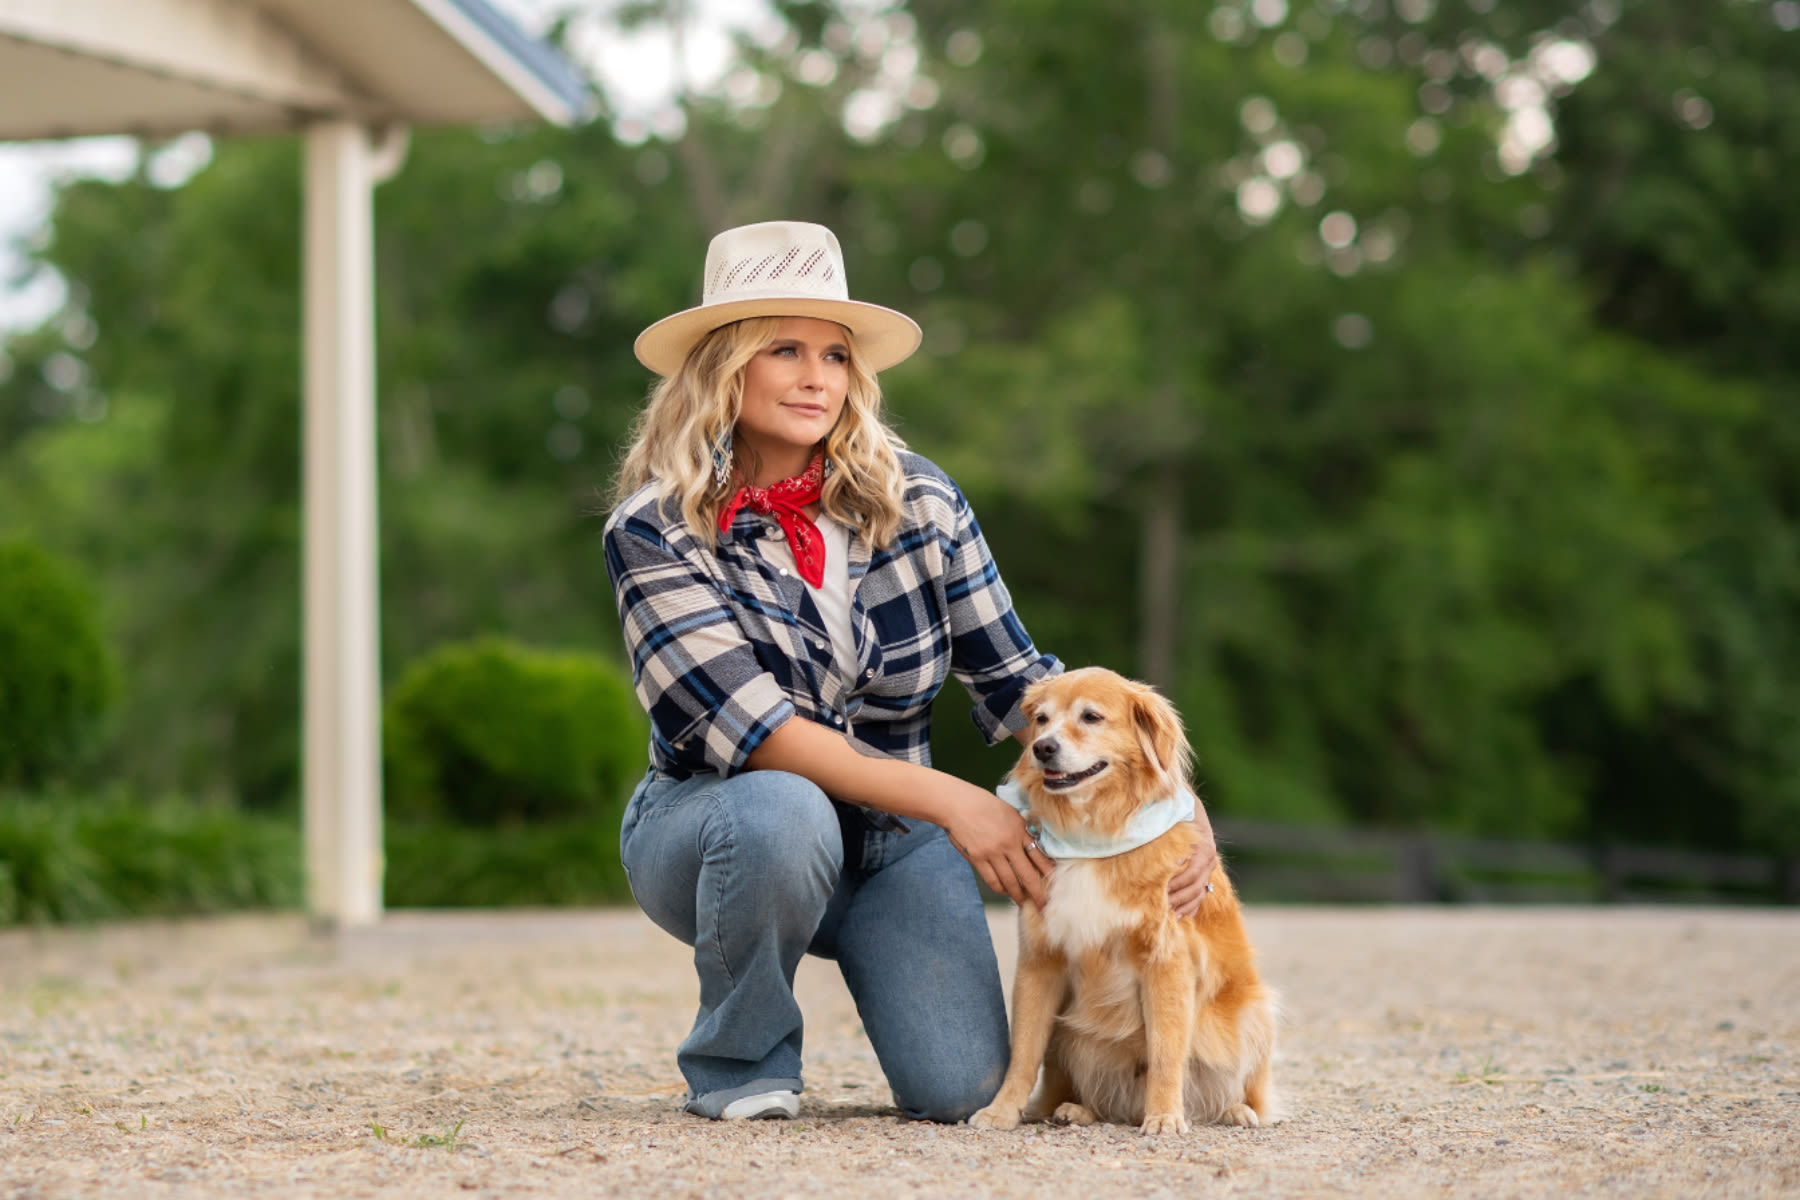 Miranda Lambert Wants to Save All the Dogs With ‘Music for Mutts’ Benefit Concert